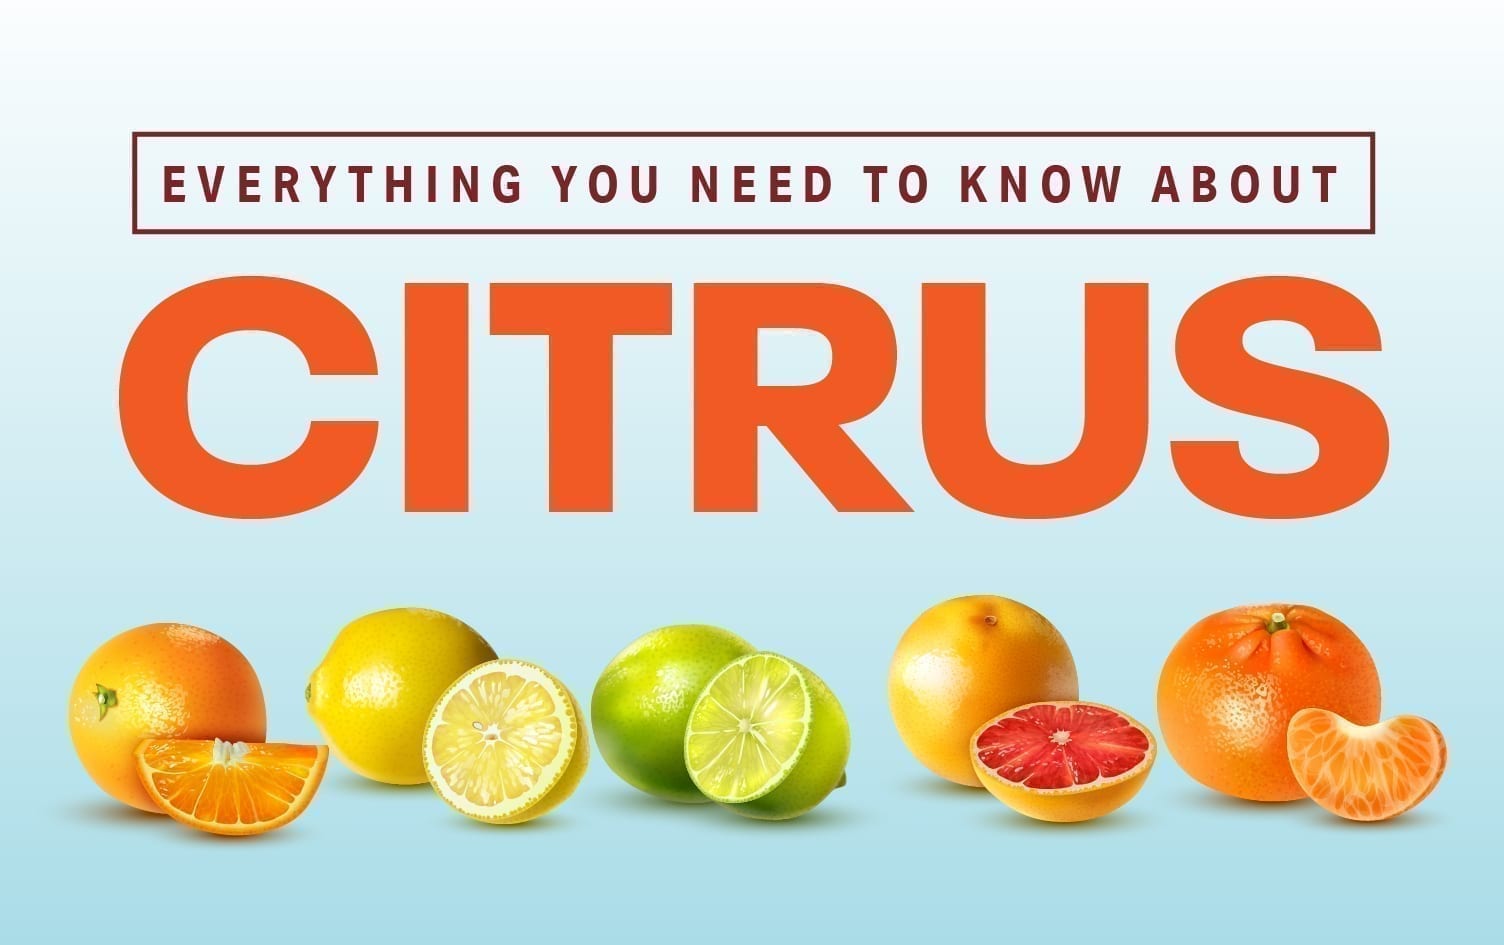 Everything You Need to Know About Citrus